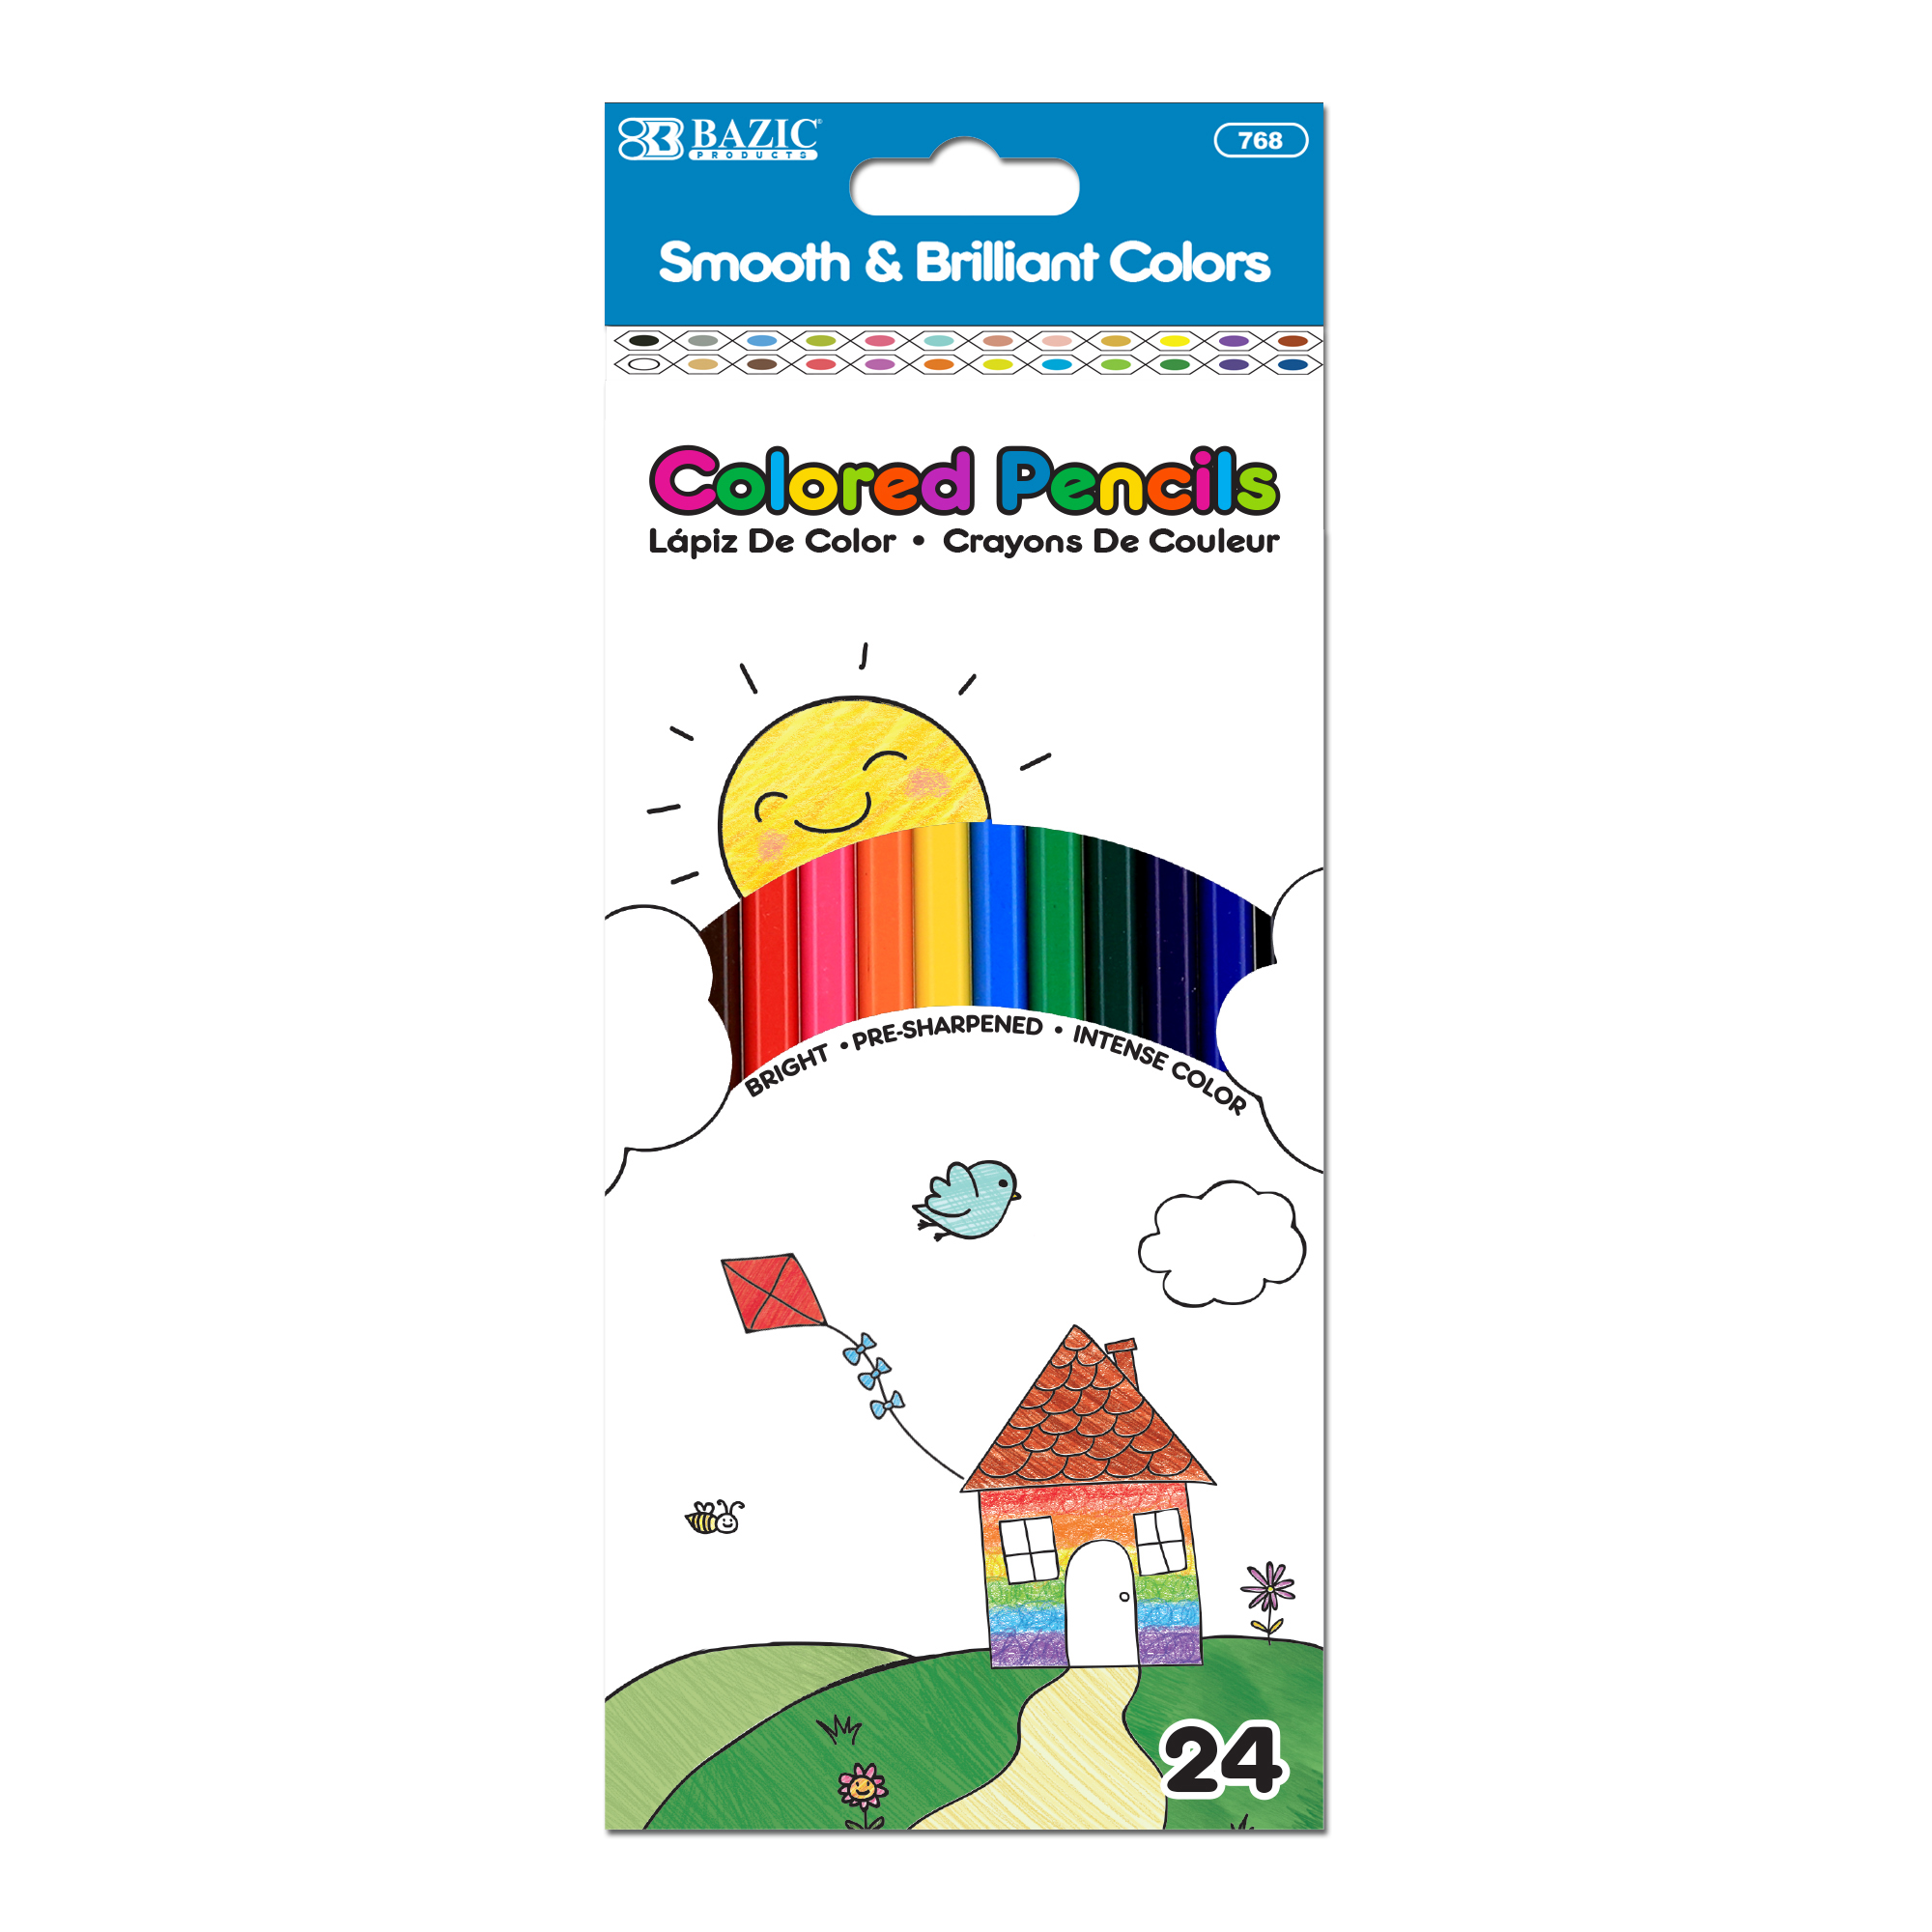 Color Chalk (20/Bucket)  Bazic Products Bazic Products